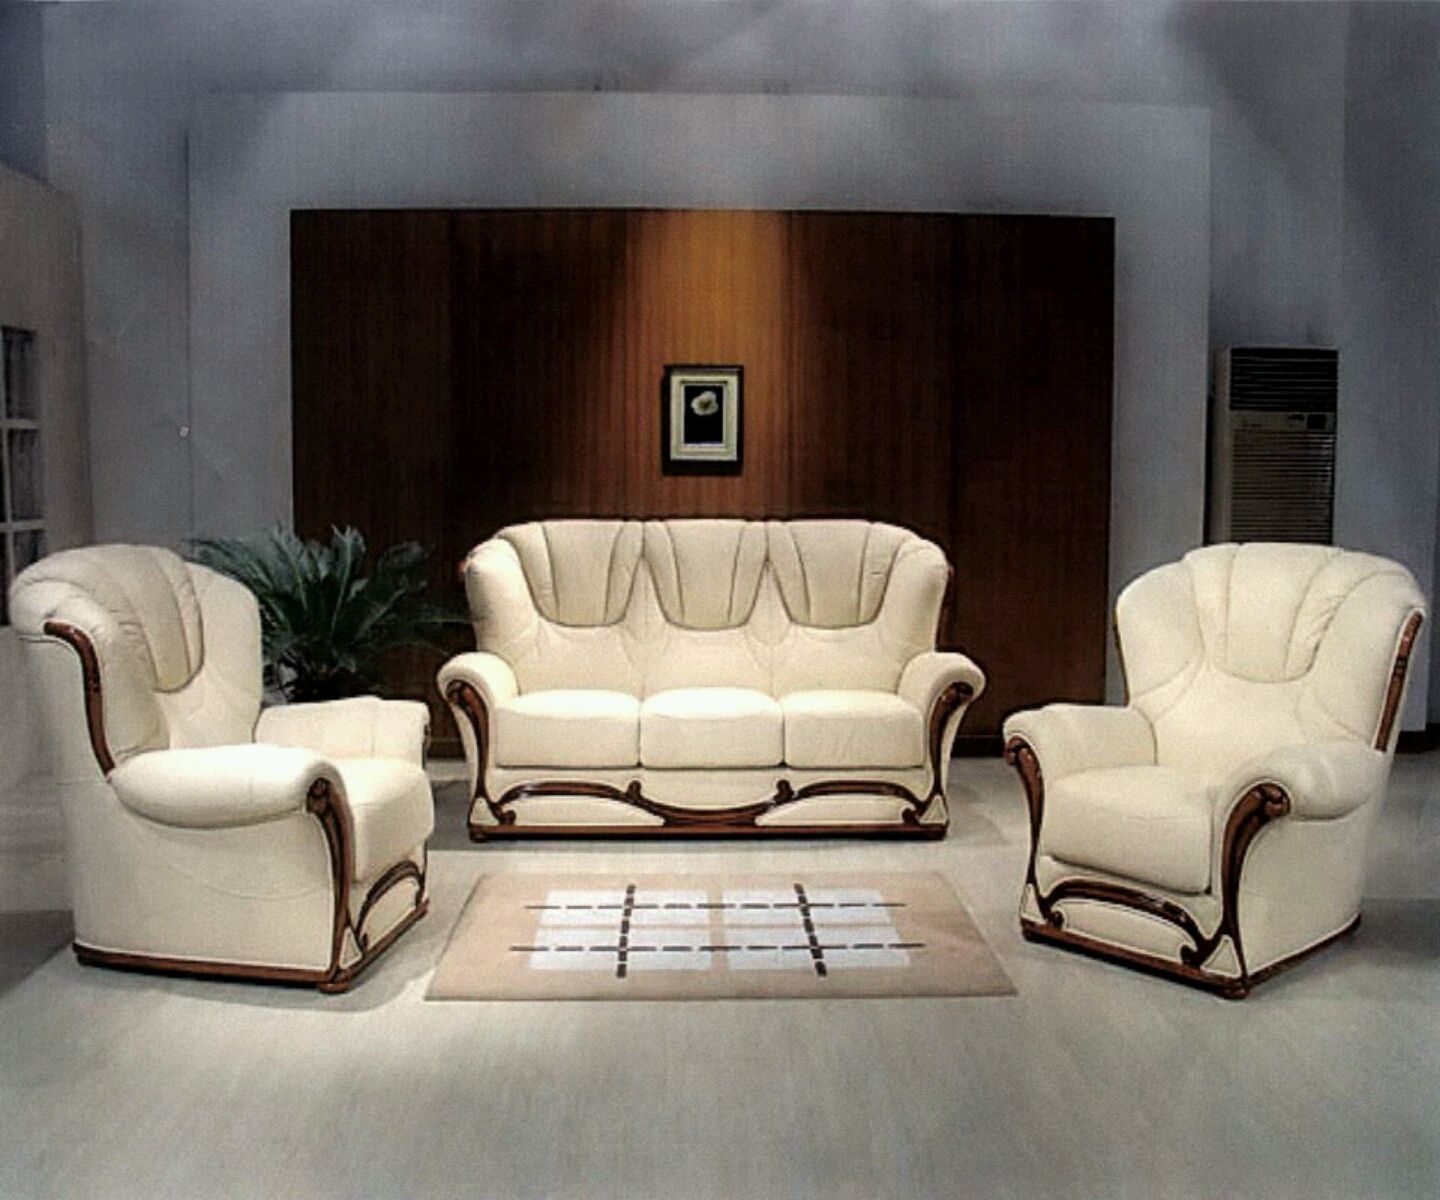 Sofas Center Traditional Sofas Loveseats Chairs Sets Sectionals Inside Elegant Sofas And Chairs (View 7 of 15)